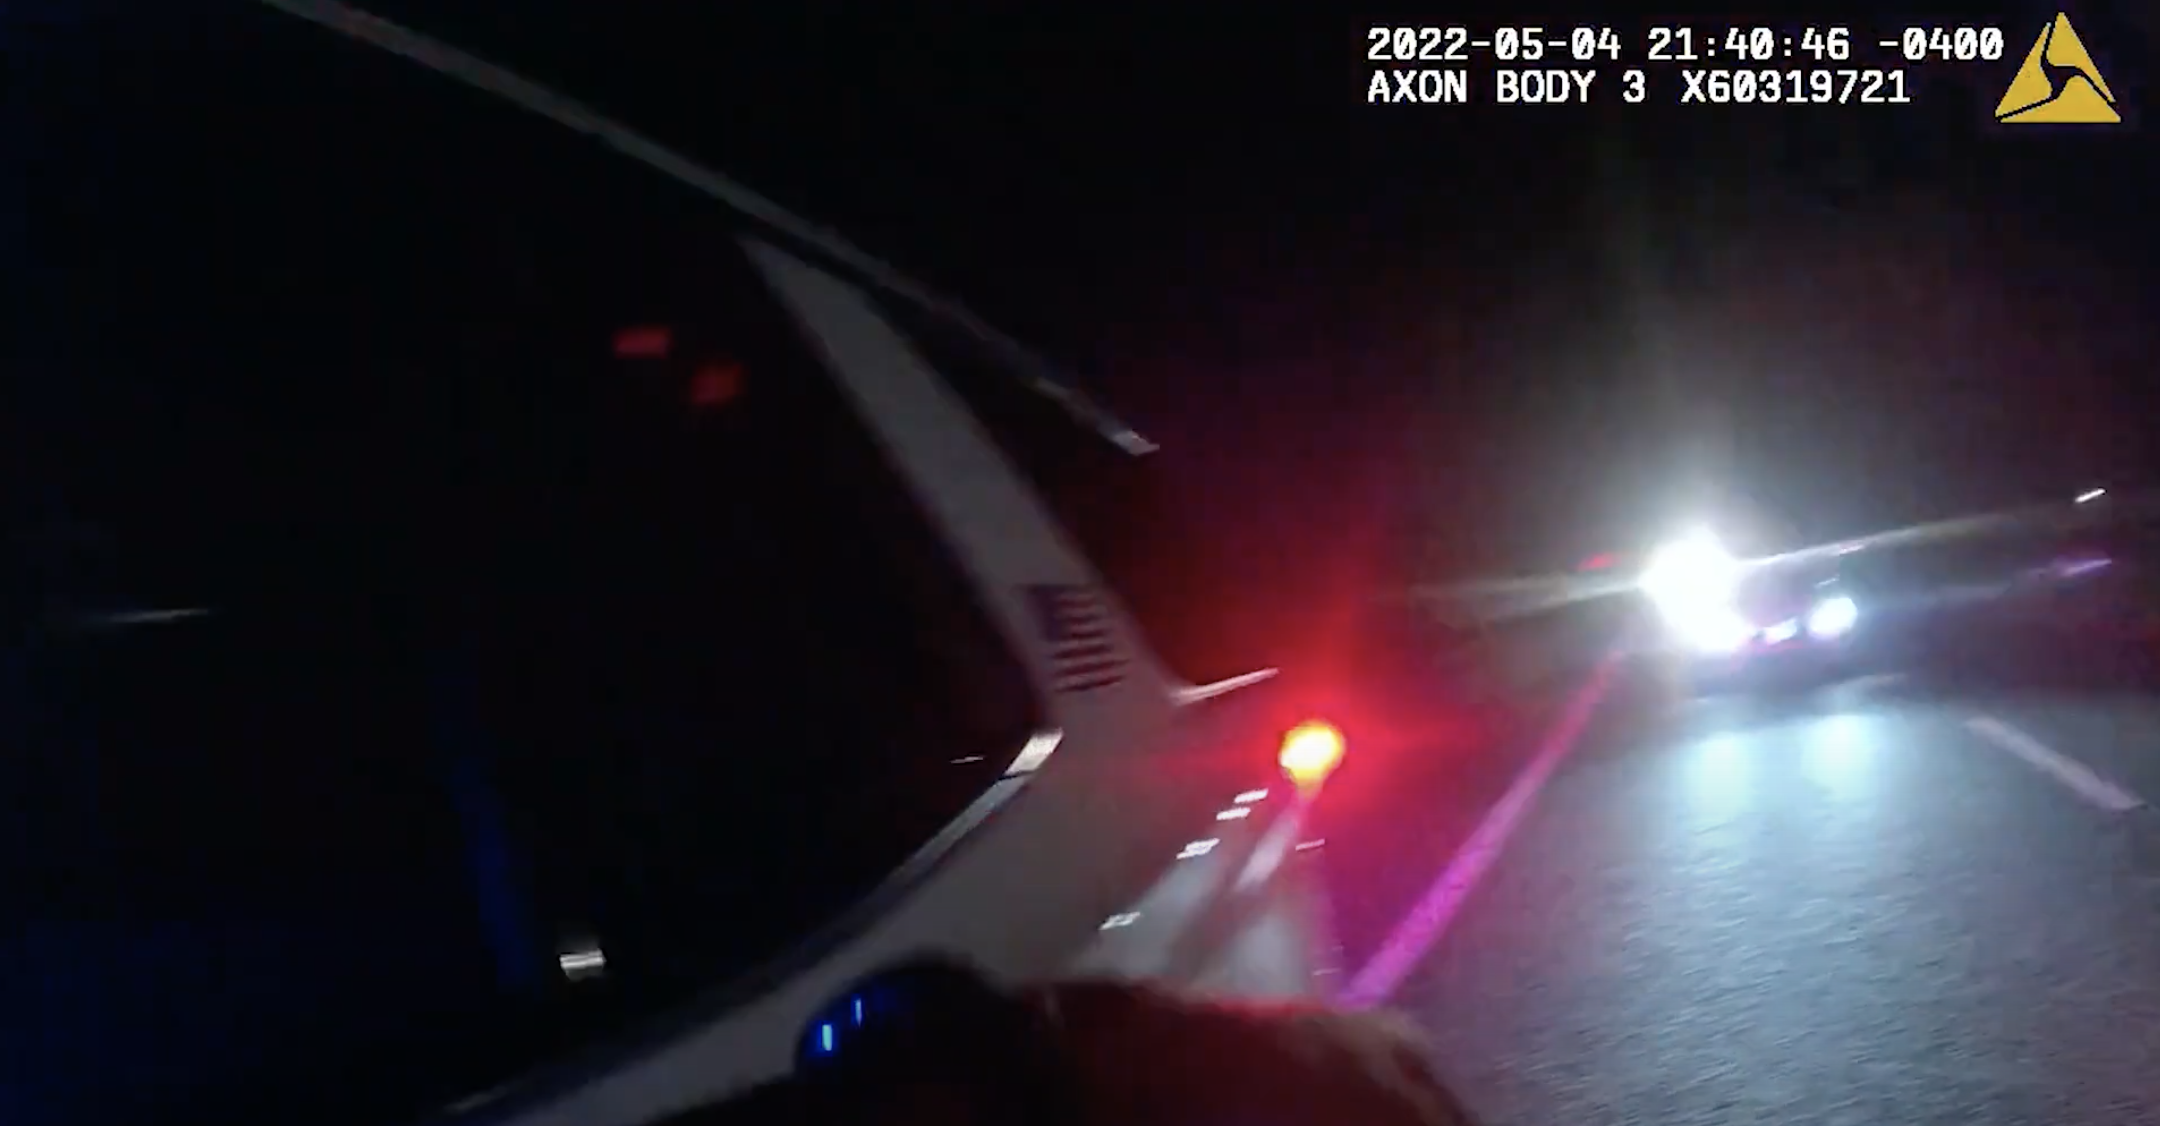 MOVE OVER: Deputy nearly struck by passing vehicle